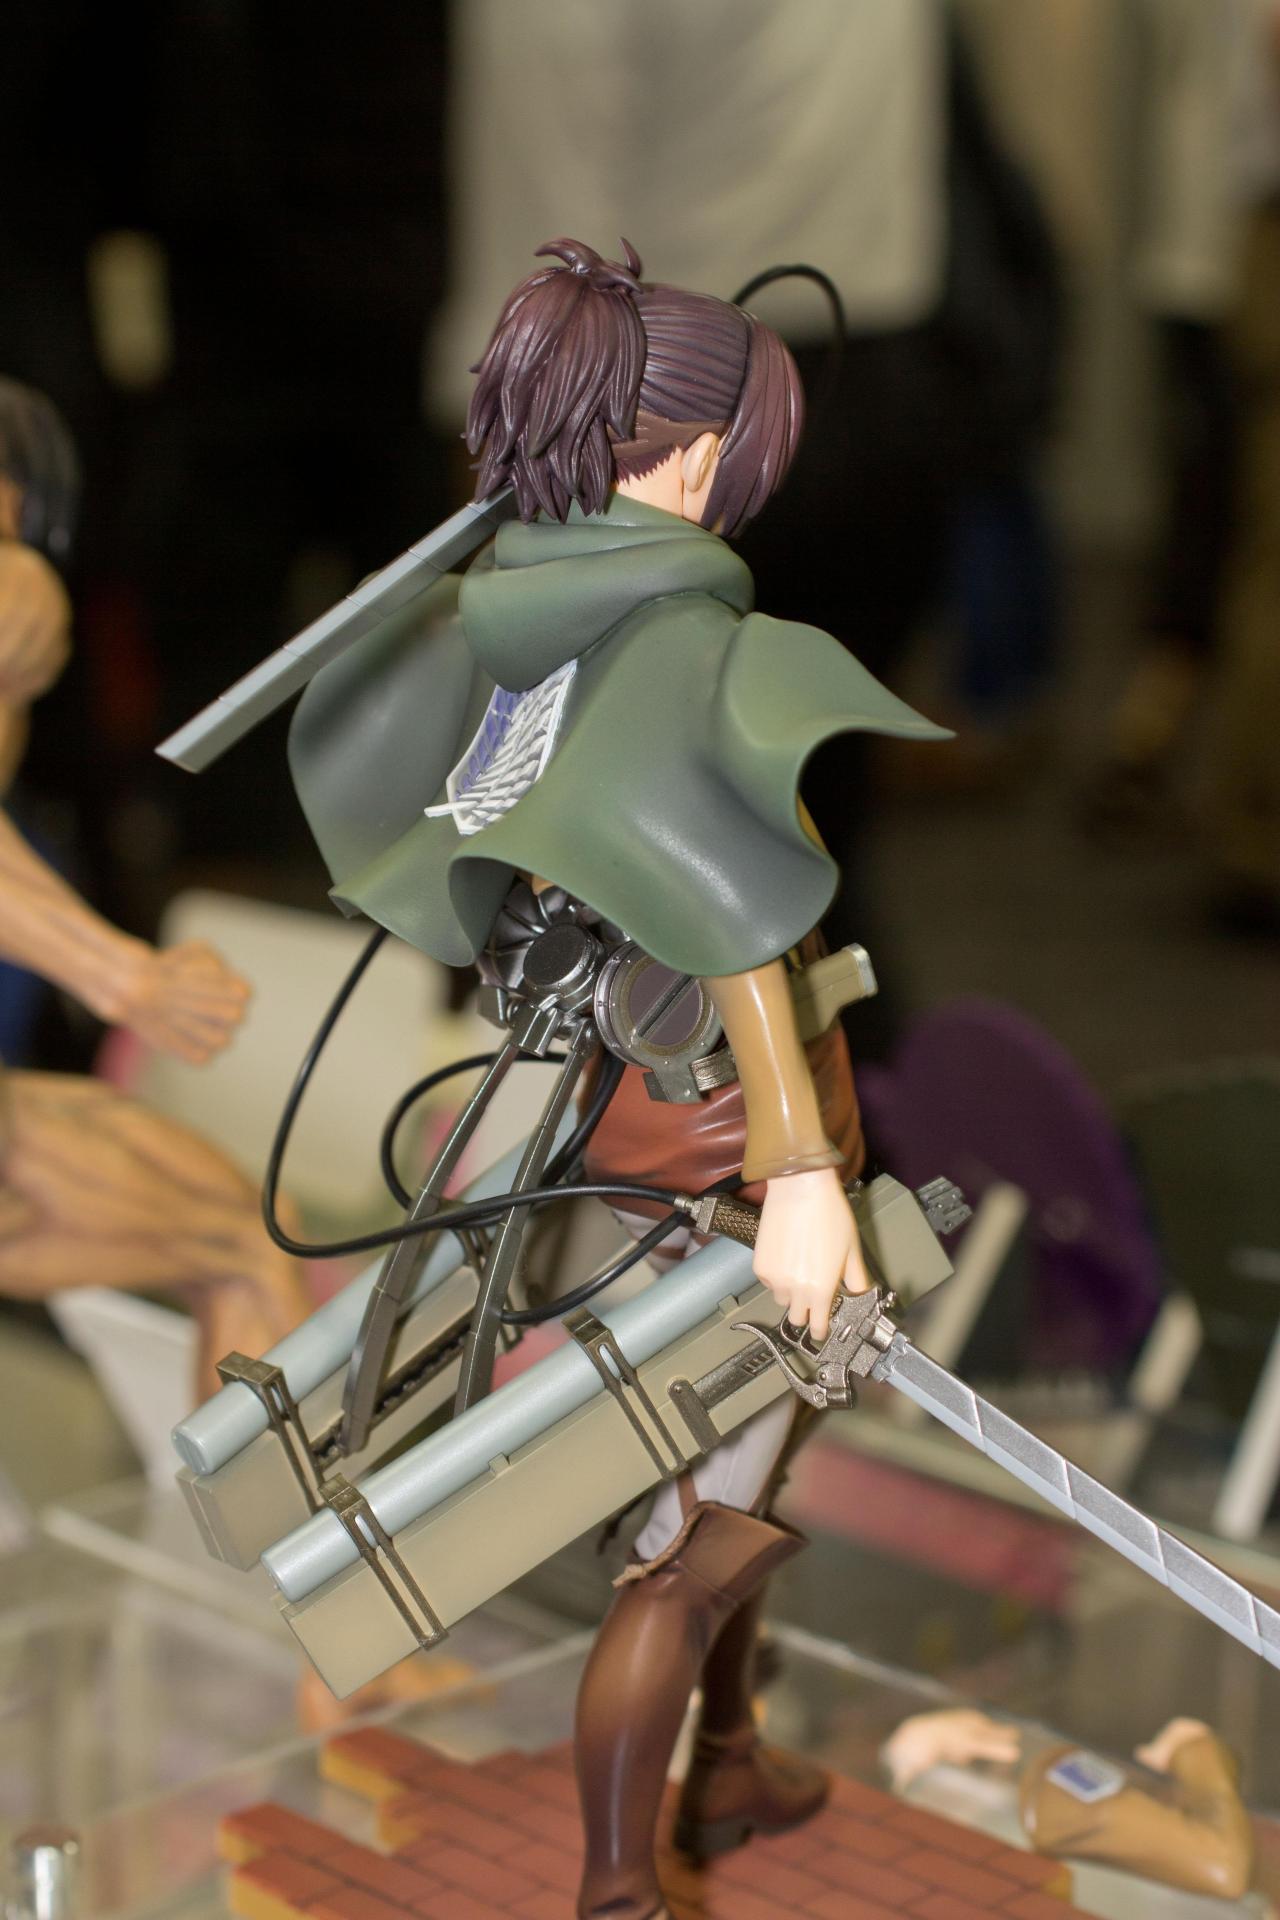 Sentinel has released official images of their Hanji BRAVE-ACT figure in painted